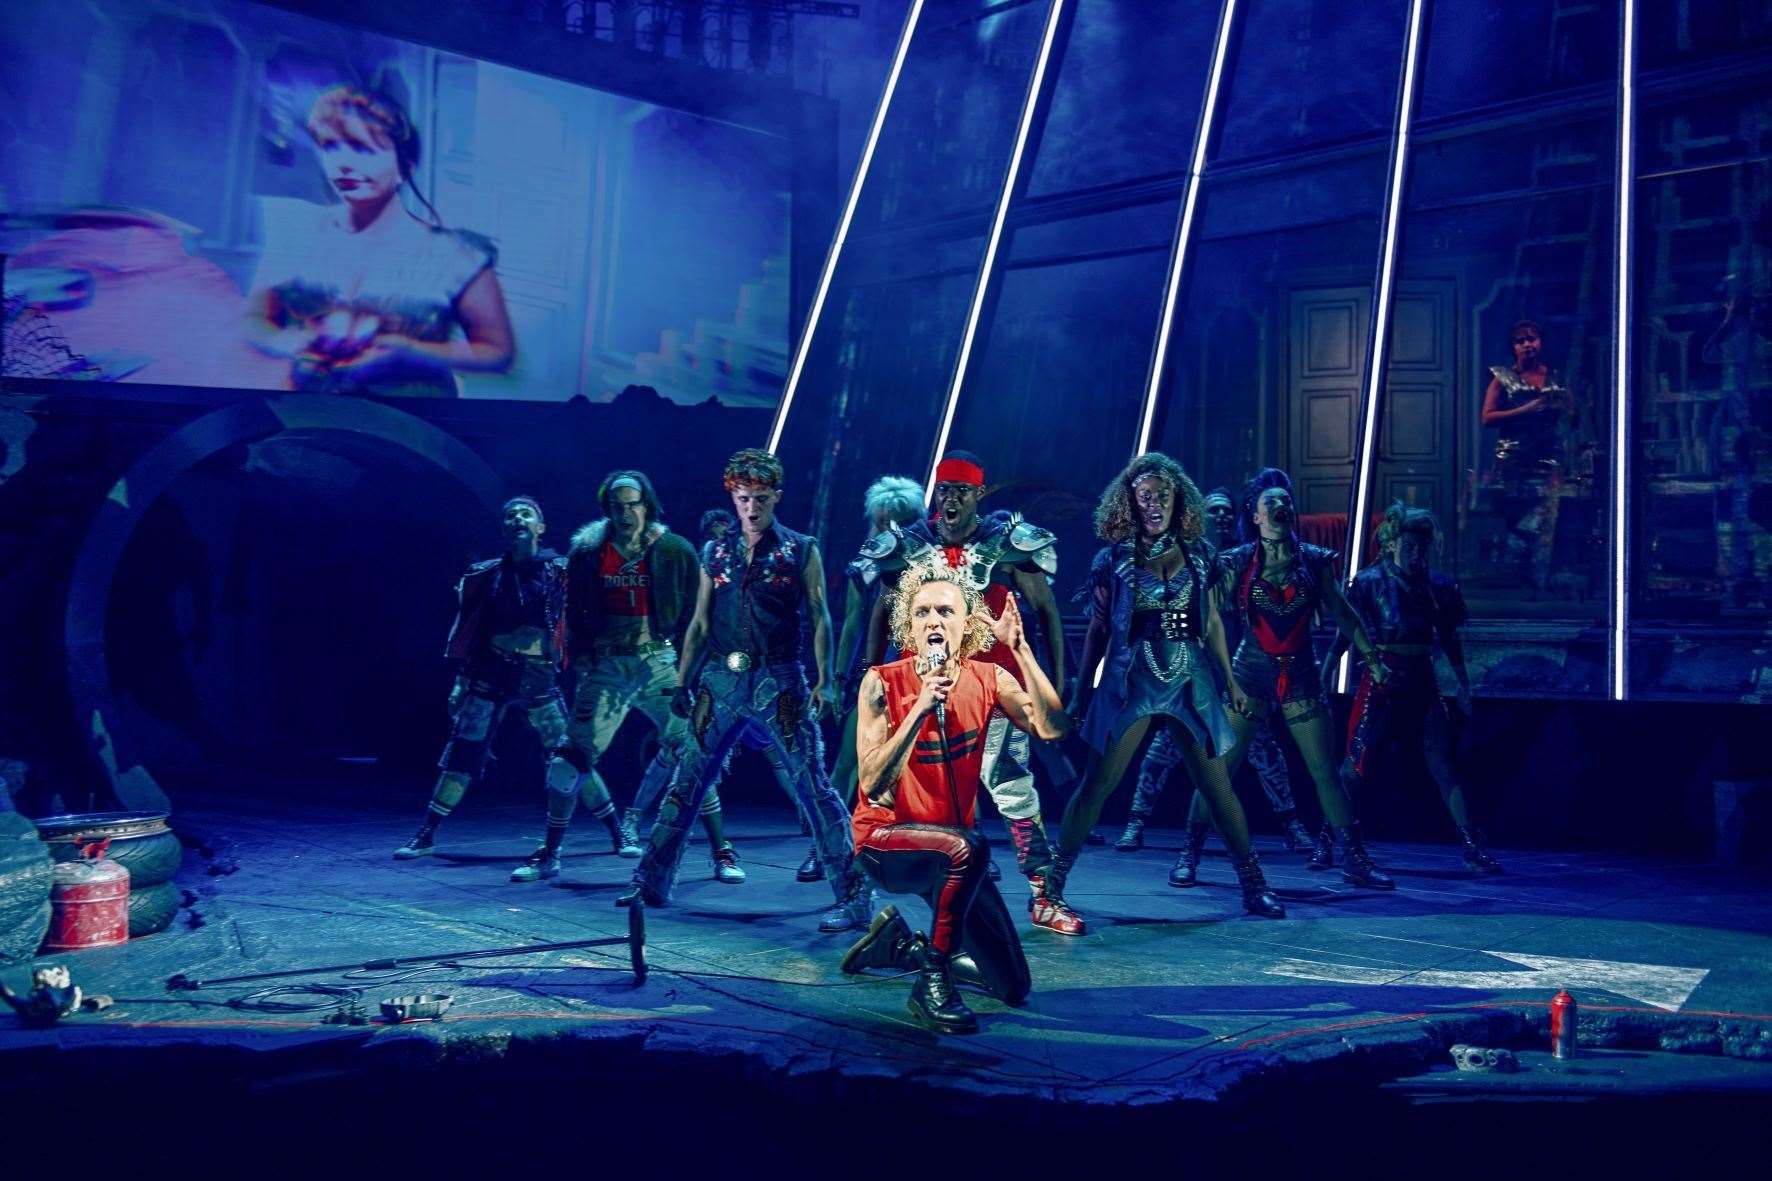 The musical has a unique staging with a main central area, a separate elevated section, and portions of the action are filmed live and projected onto video screens.